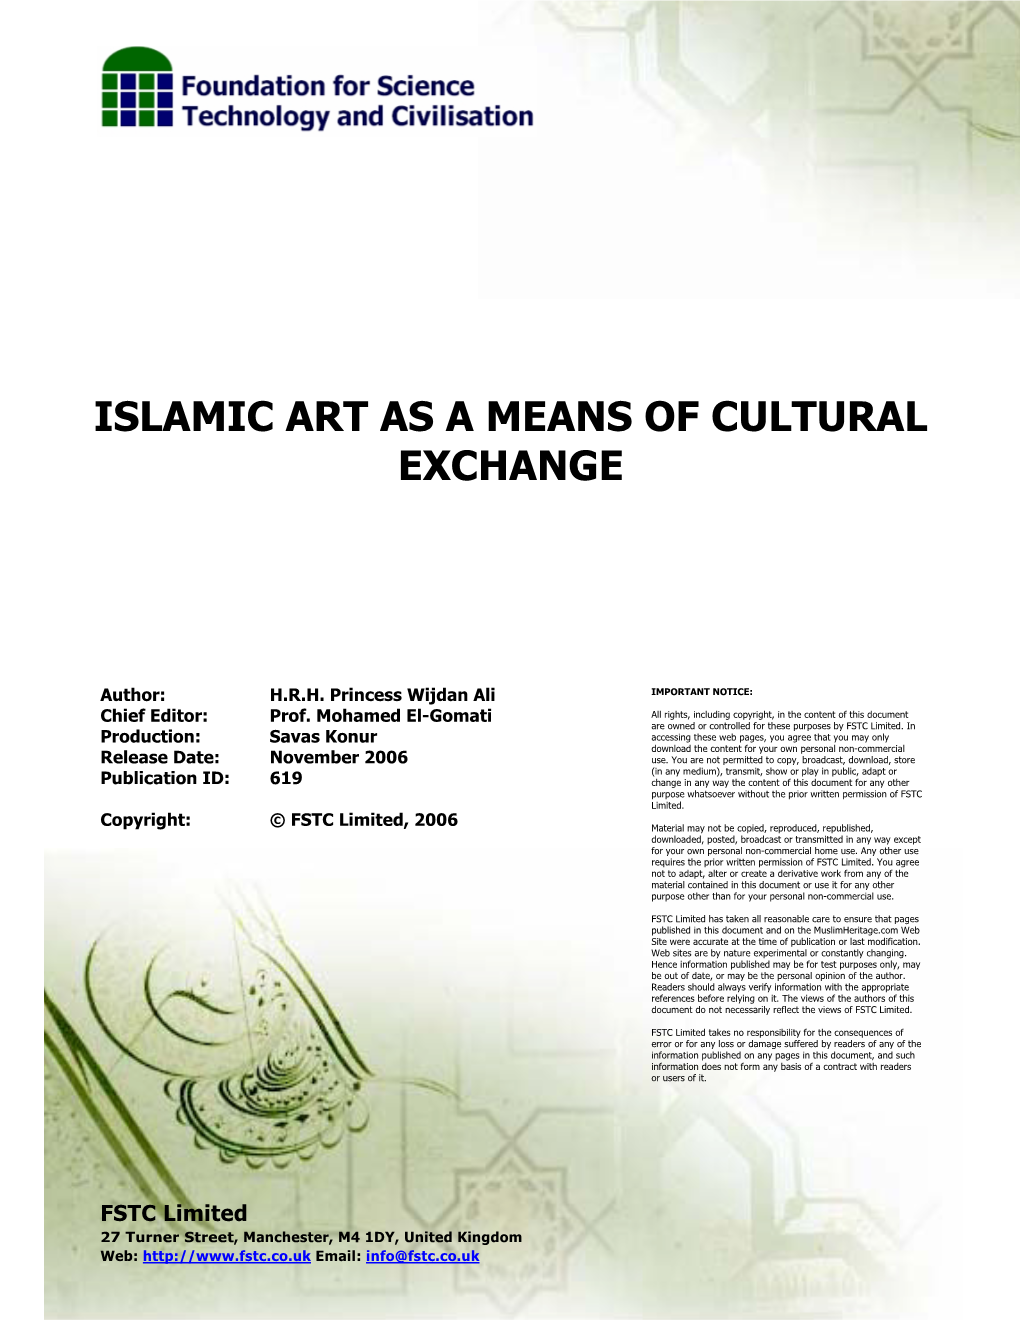 Islamic Art As a Means of Cultural Exchange